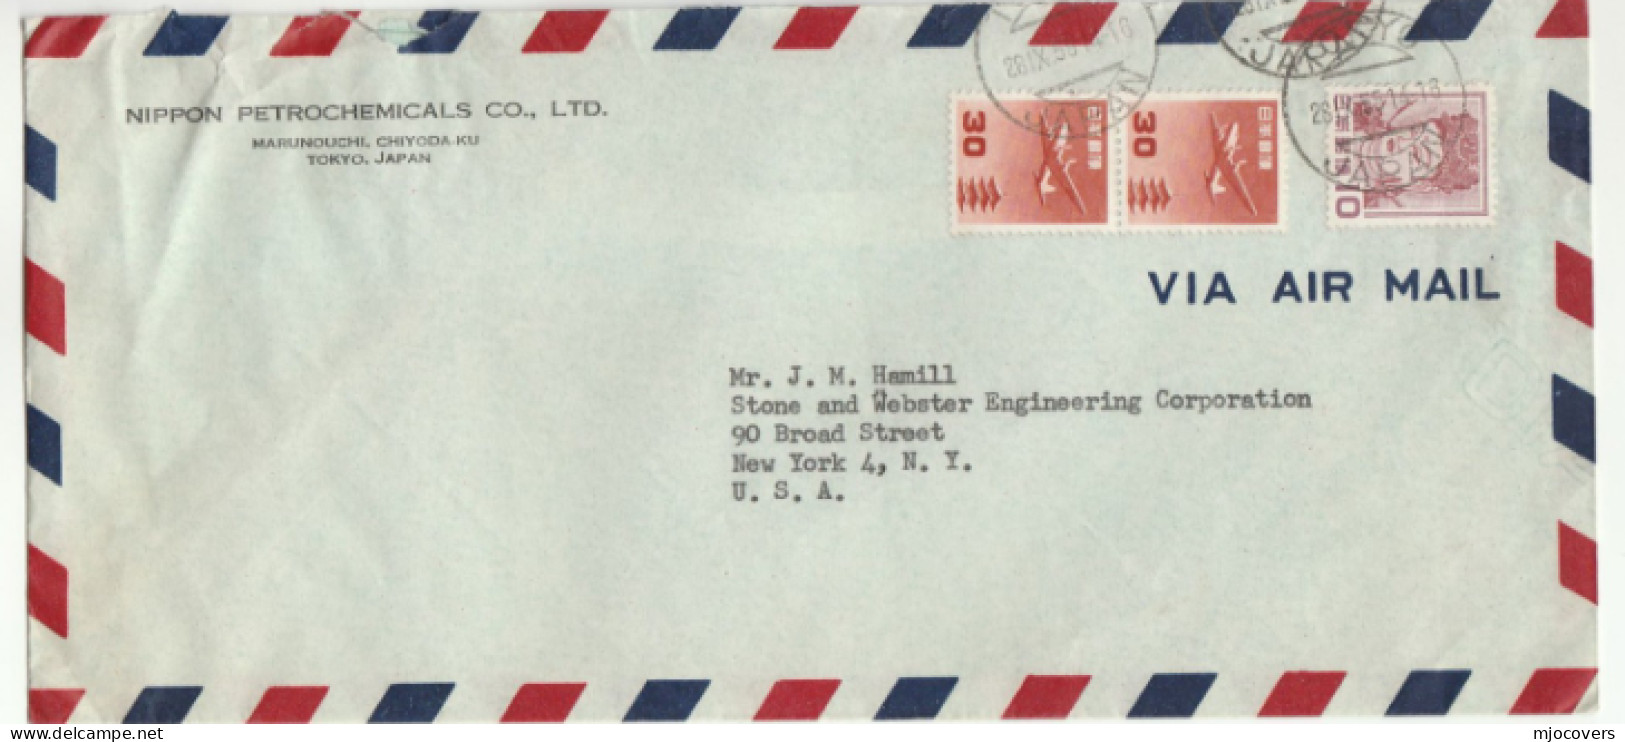 1955 NIPPON PETROCHEMICALS Co Japan COVER Airmail To Stone & Webster ENGINEERING Co USA Energy Oil Minerals Stamps - Oil